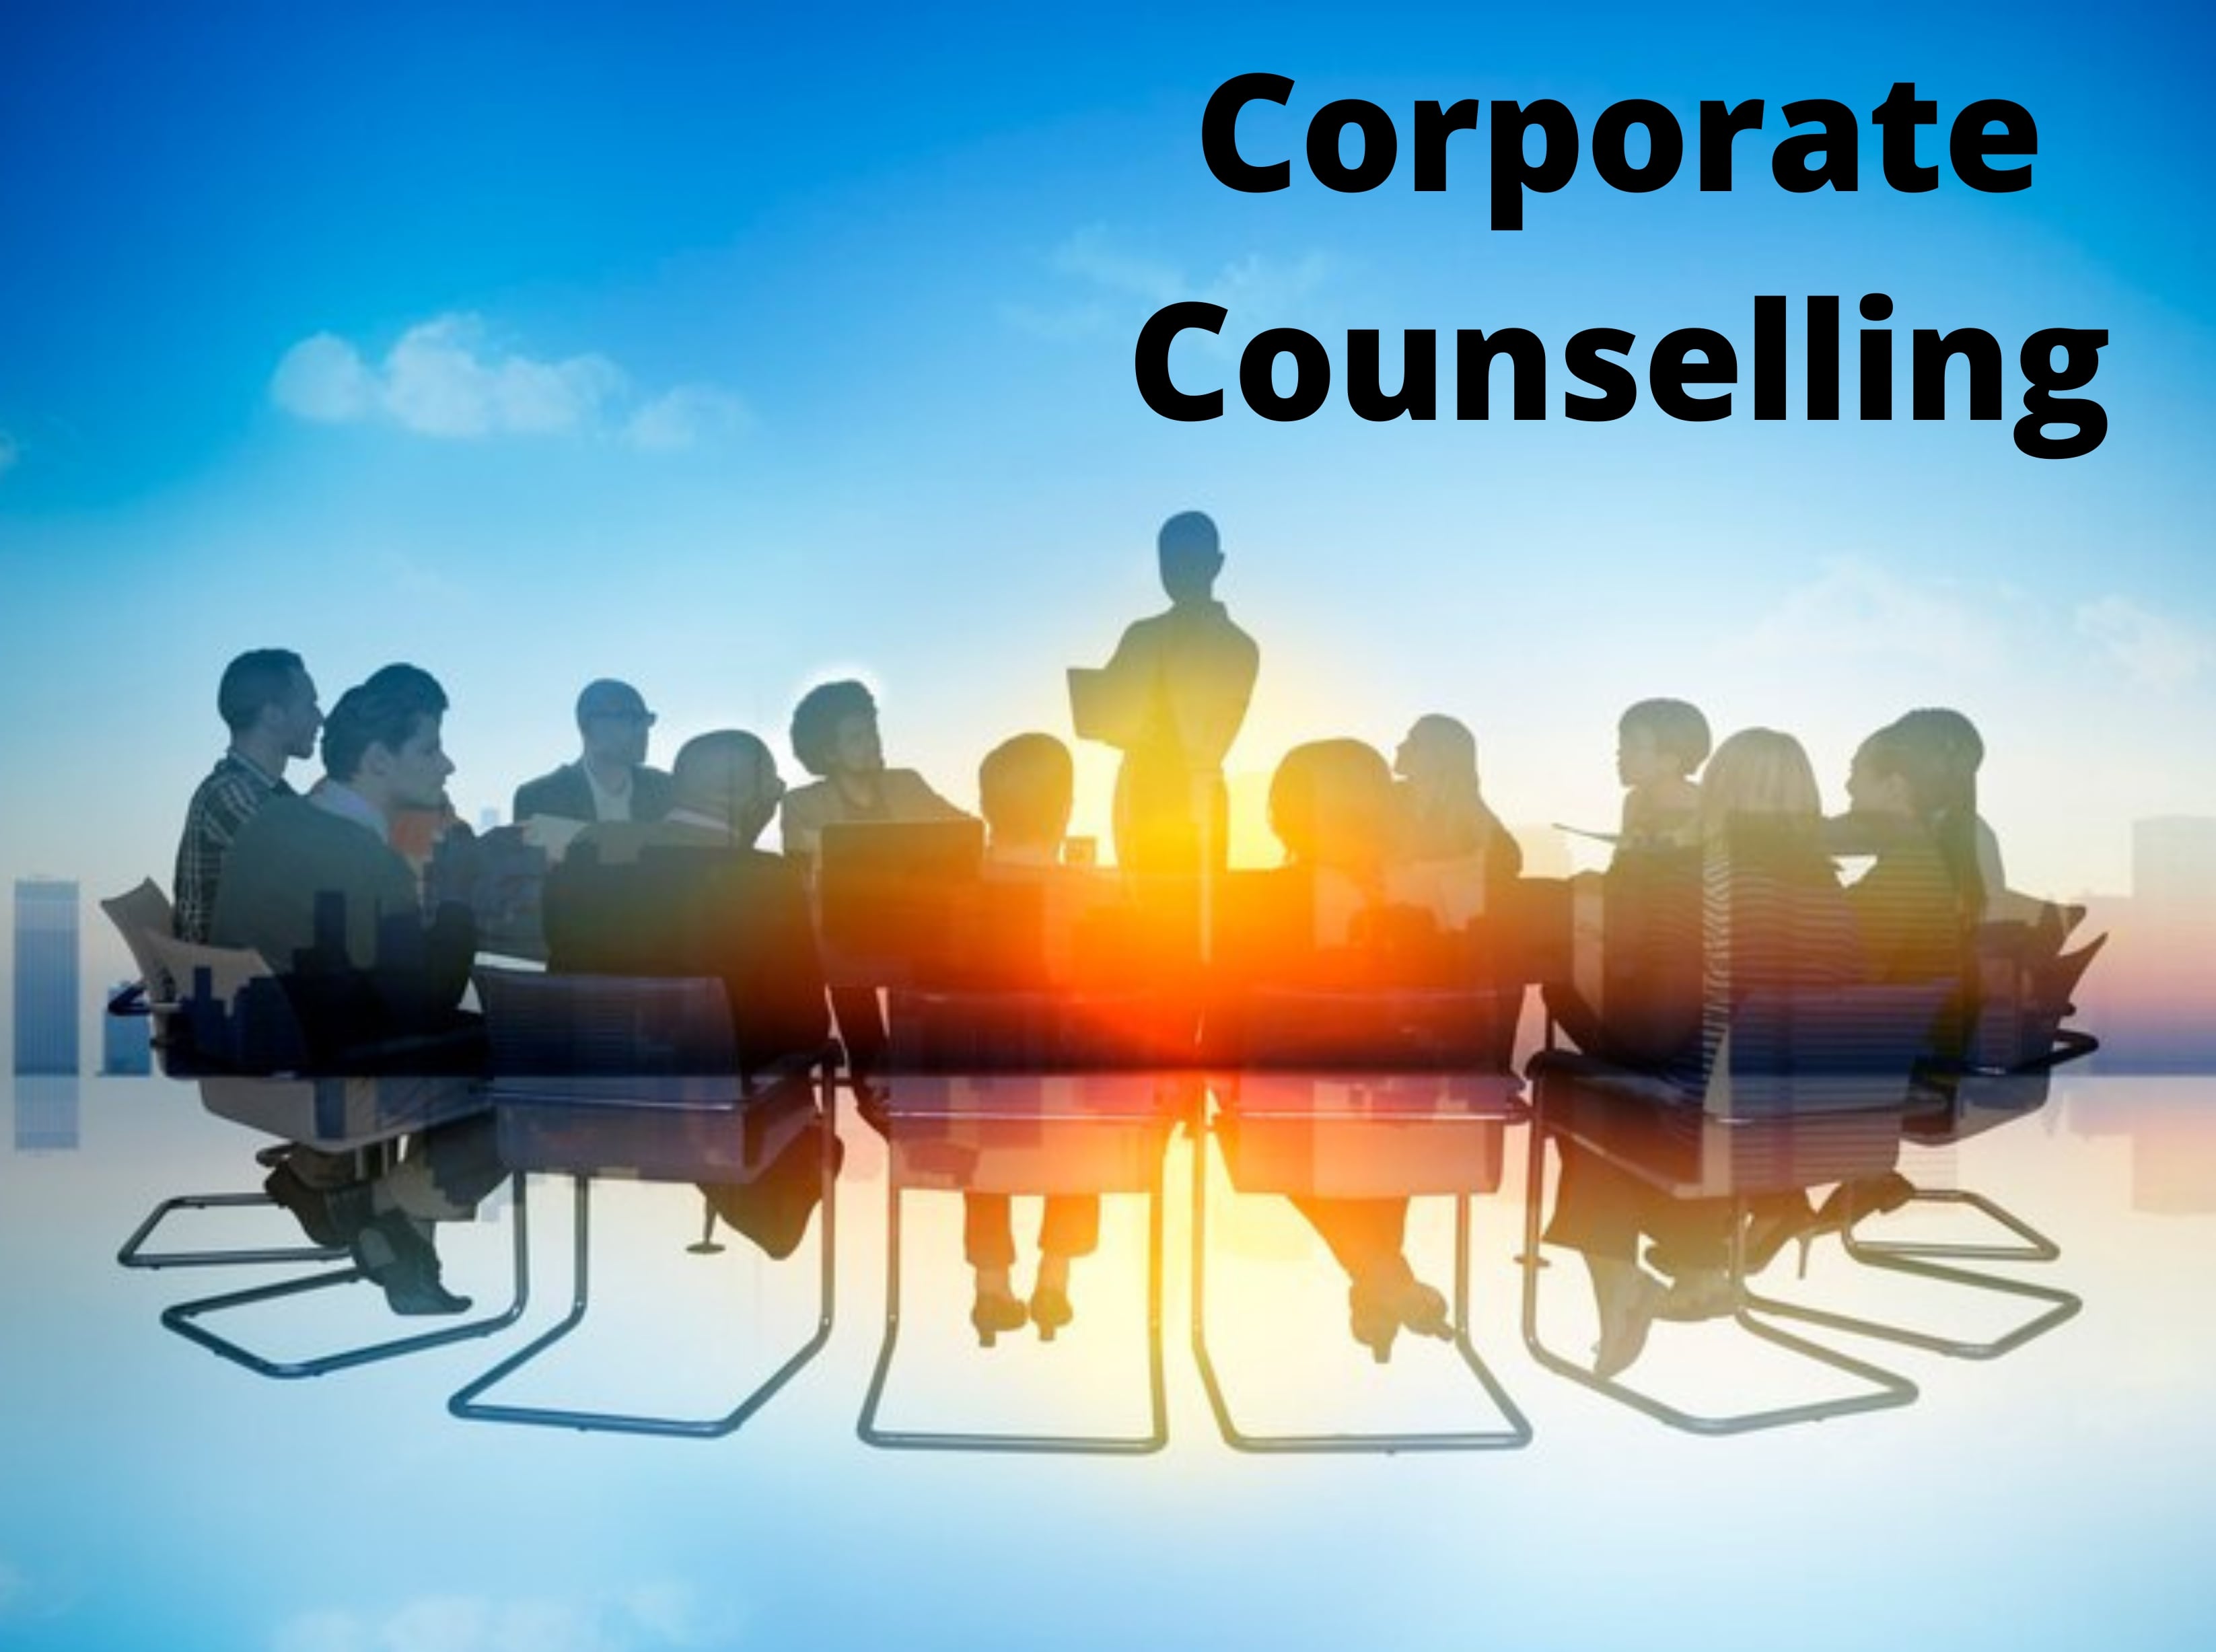 Corporate Counselling in Nashik | Corporate Counselors in Nashik | Corporate Counselors Near Me | Corporate Assessment in Nashik | Corporate Counselling Services